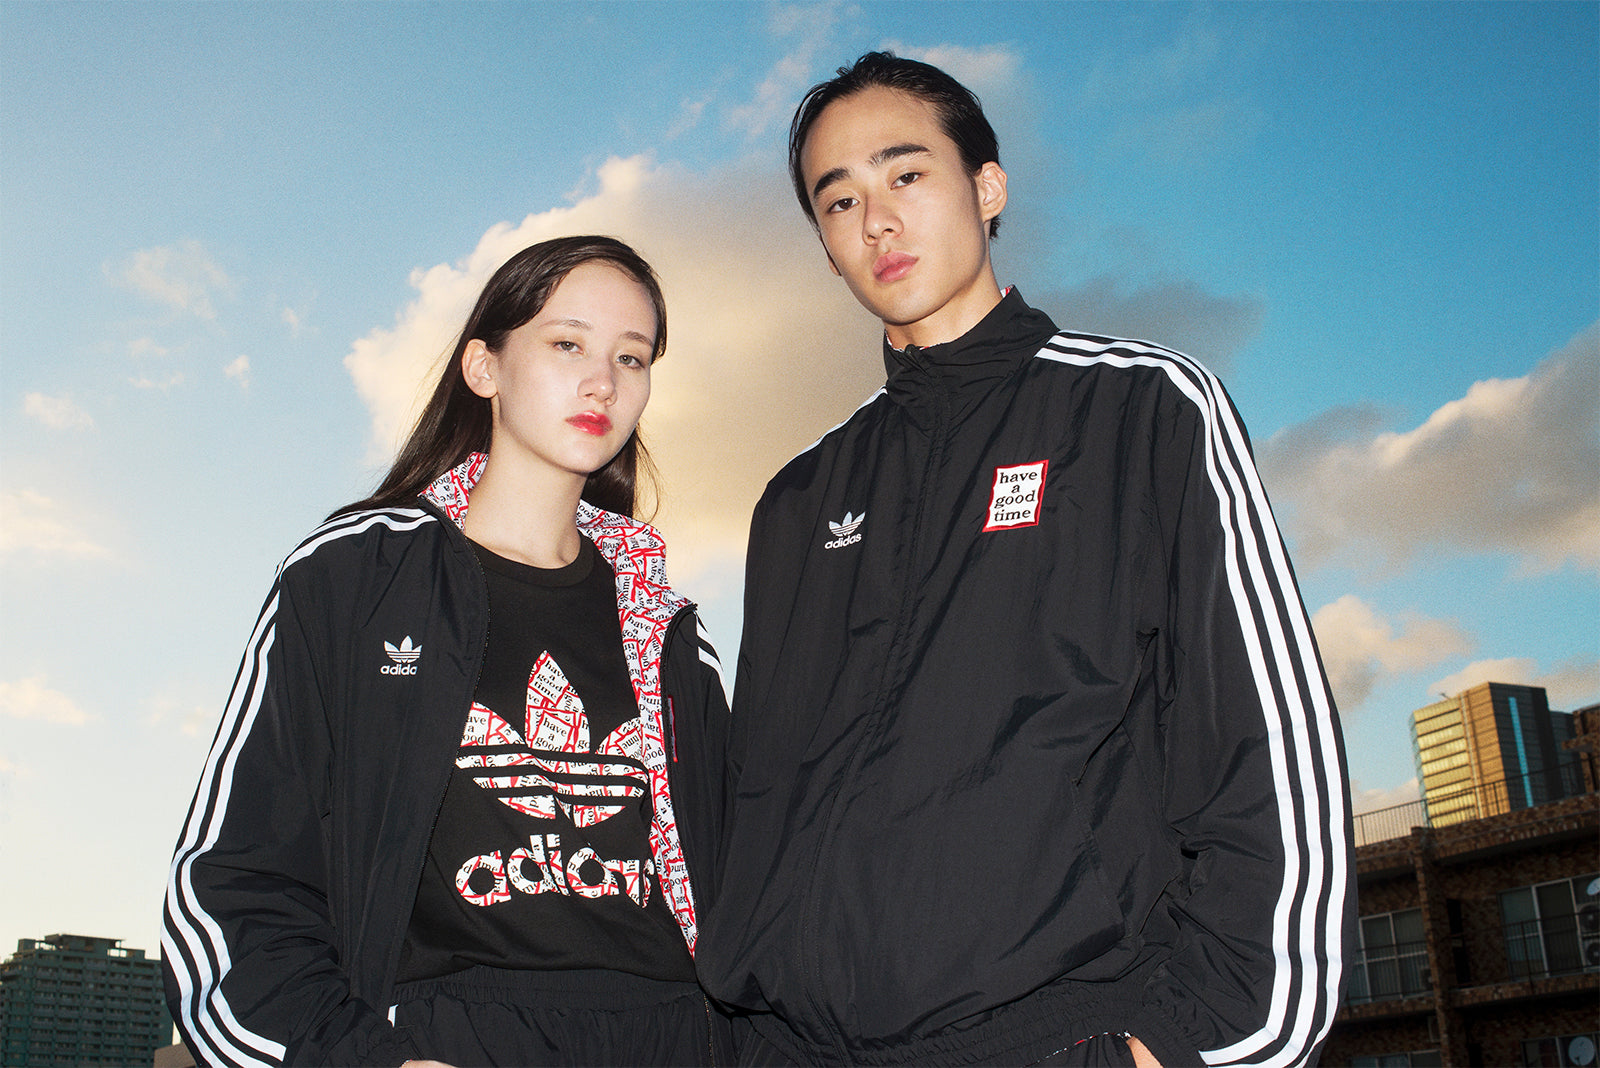 adidas have a good time jacket